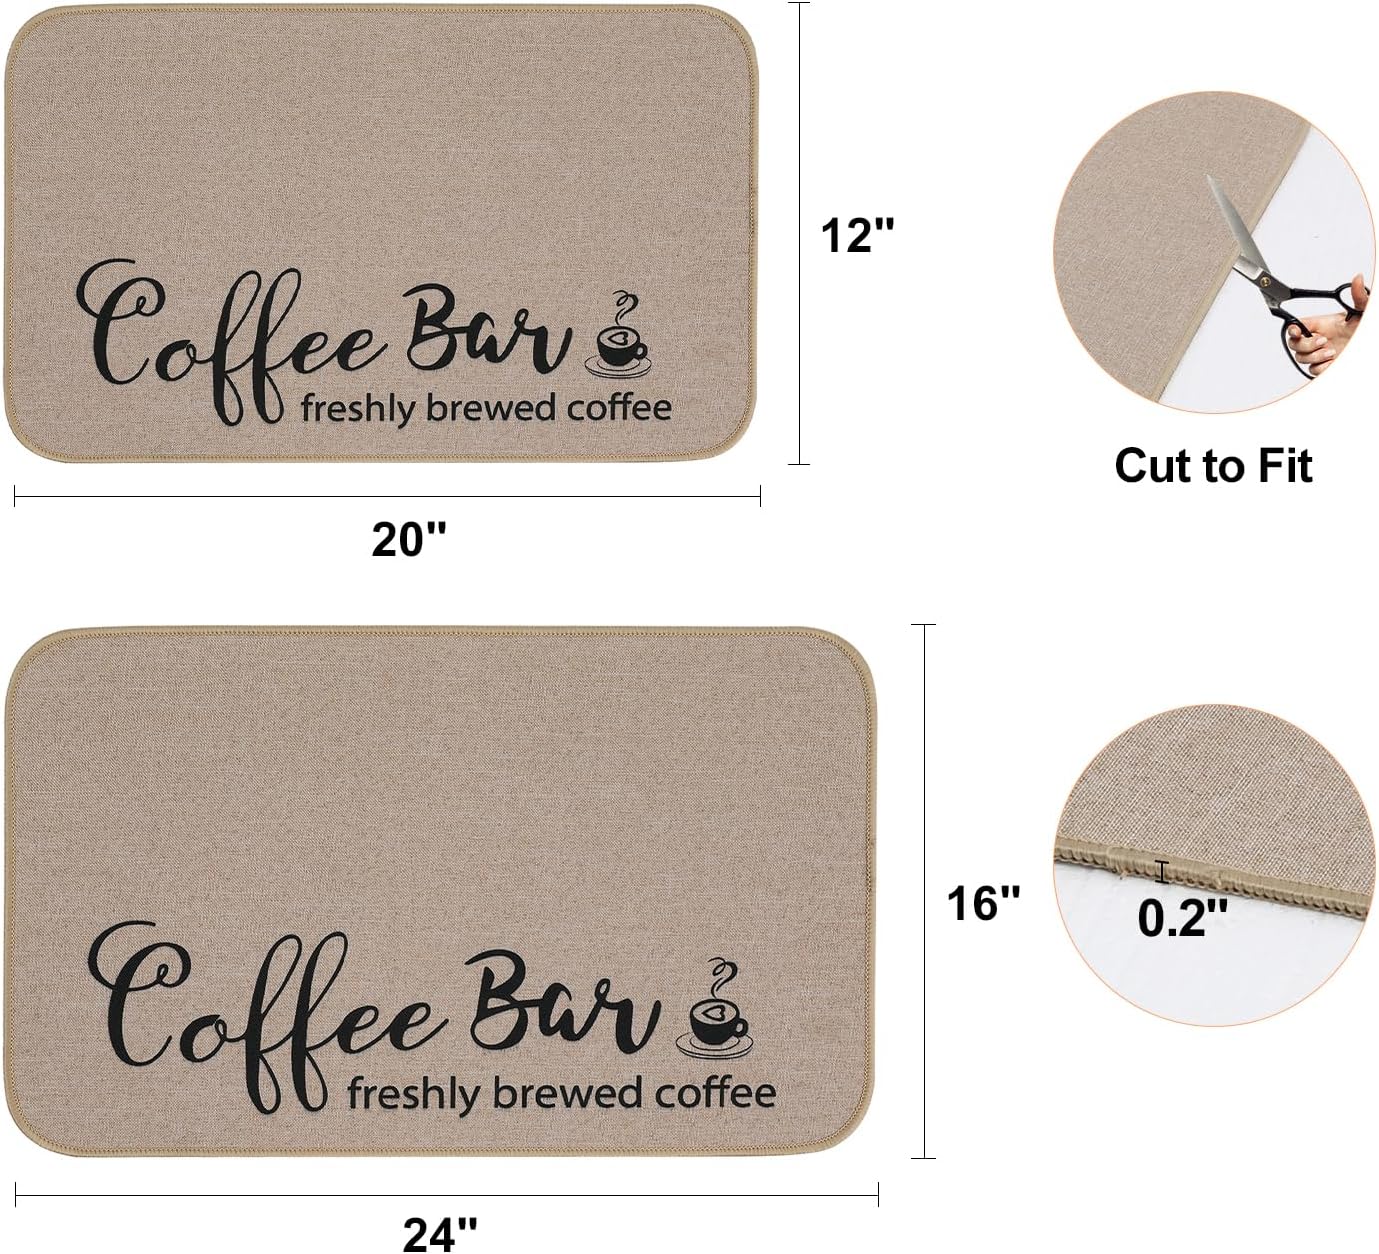 Findosom Coffee Mat: The Perfect Coffee Bar Accessory for a Tidy and Organized Kitchen